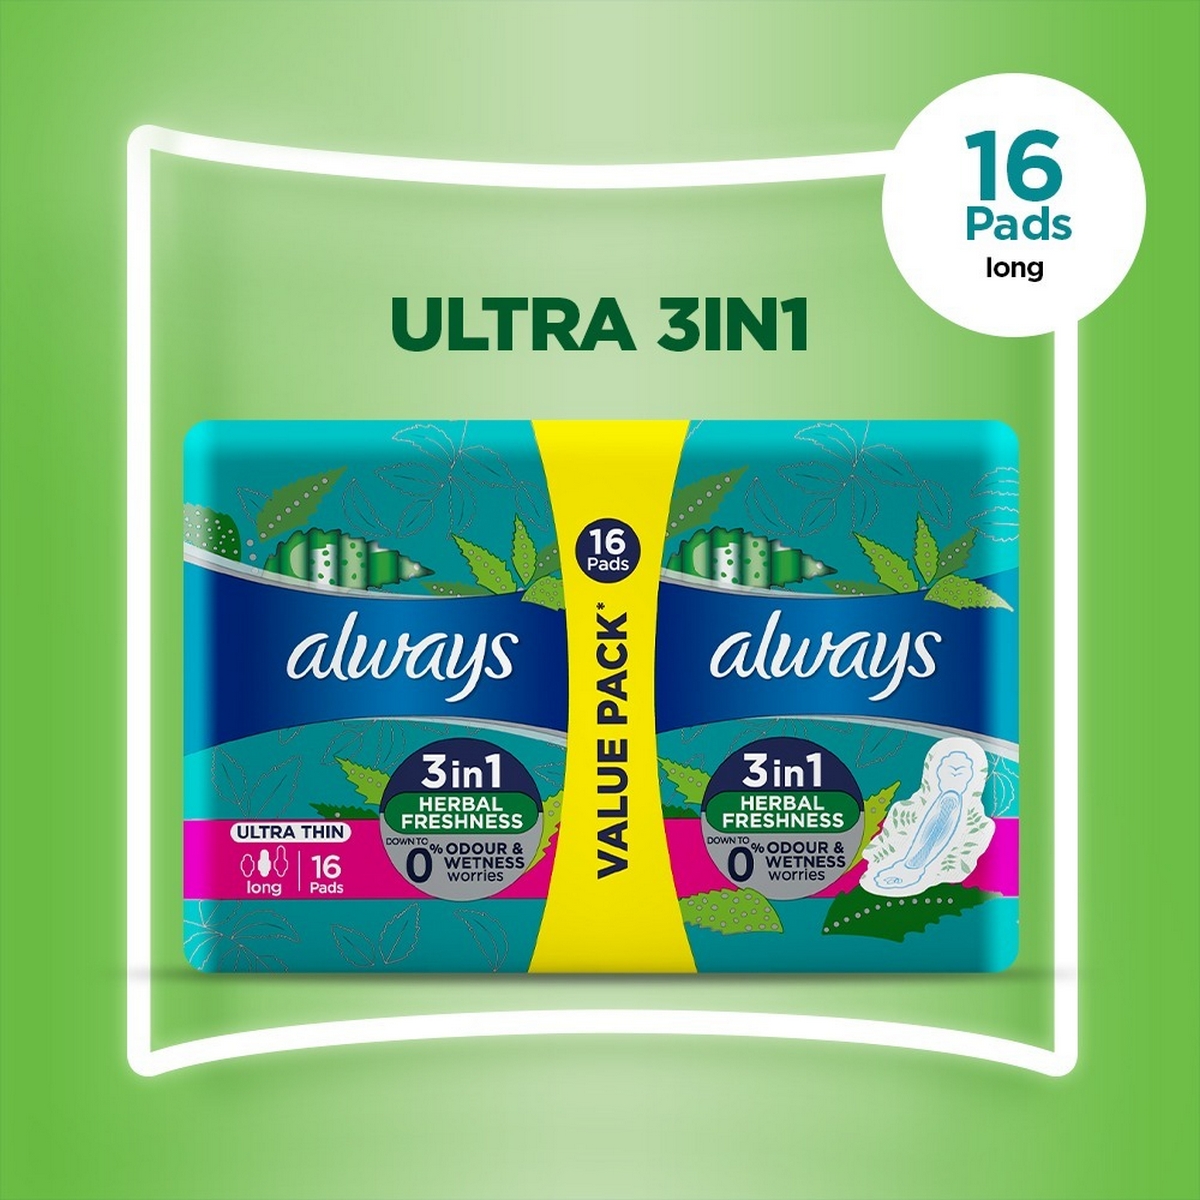 Always Ultra Thin Sanitary Pads Long Value Pack 16 Pads